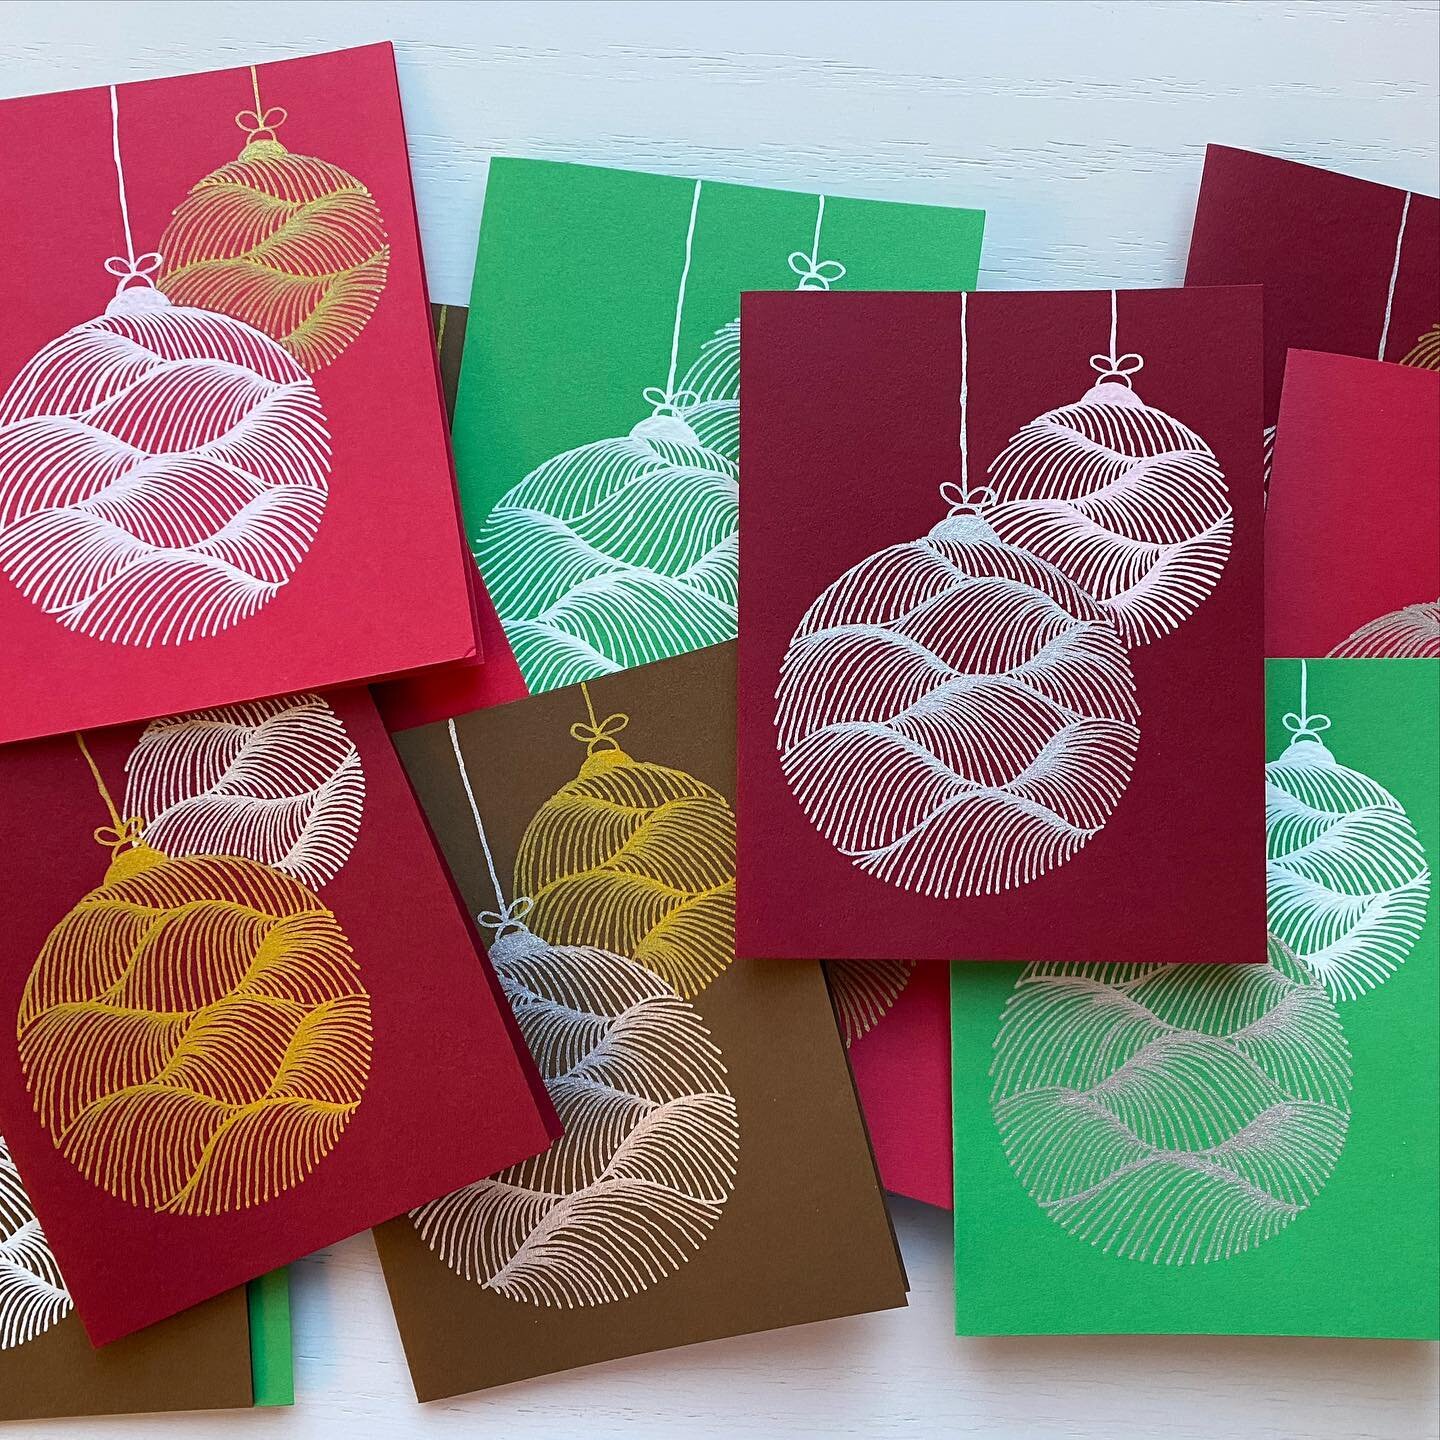 Some fun holiday crafting with inspo from @hersarong

#lineart #geometricart #giftideas #christmascards #createeveryday